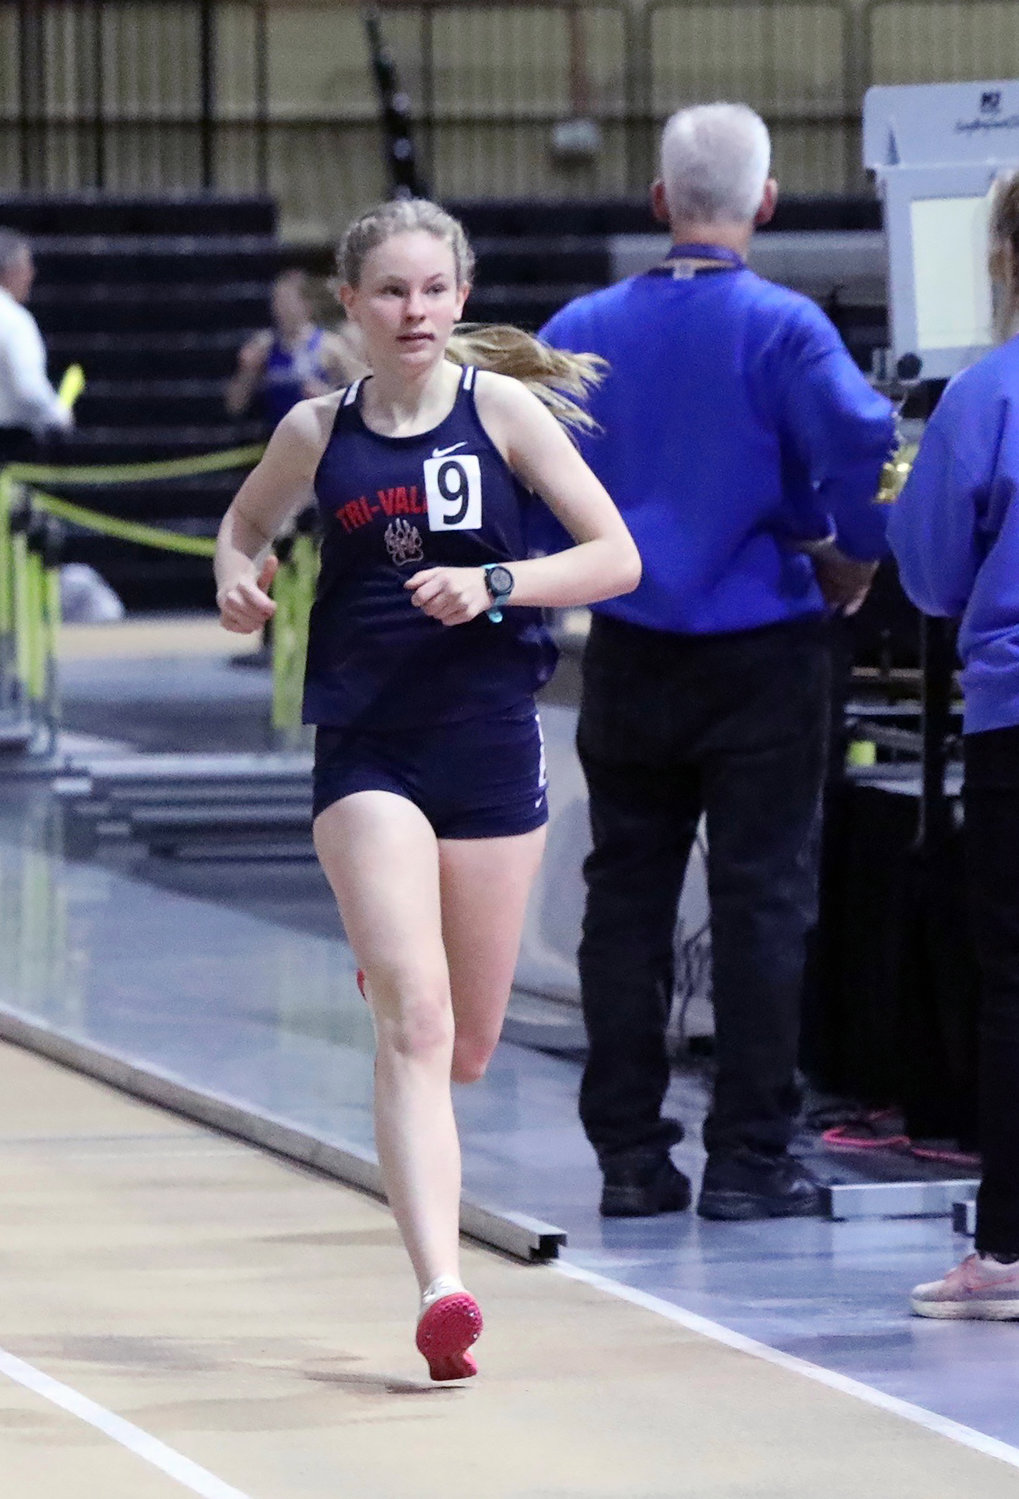 Tri-Valley’s Amelia Mickelson had a great day with first in the 600 and 1500 along with a second place in the 3000.